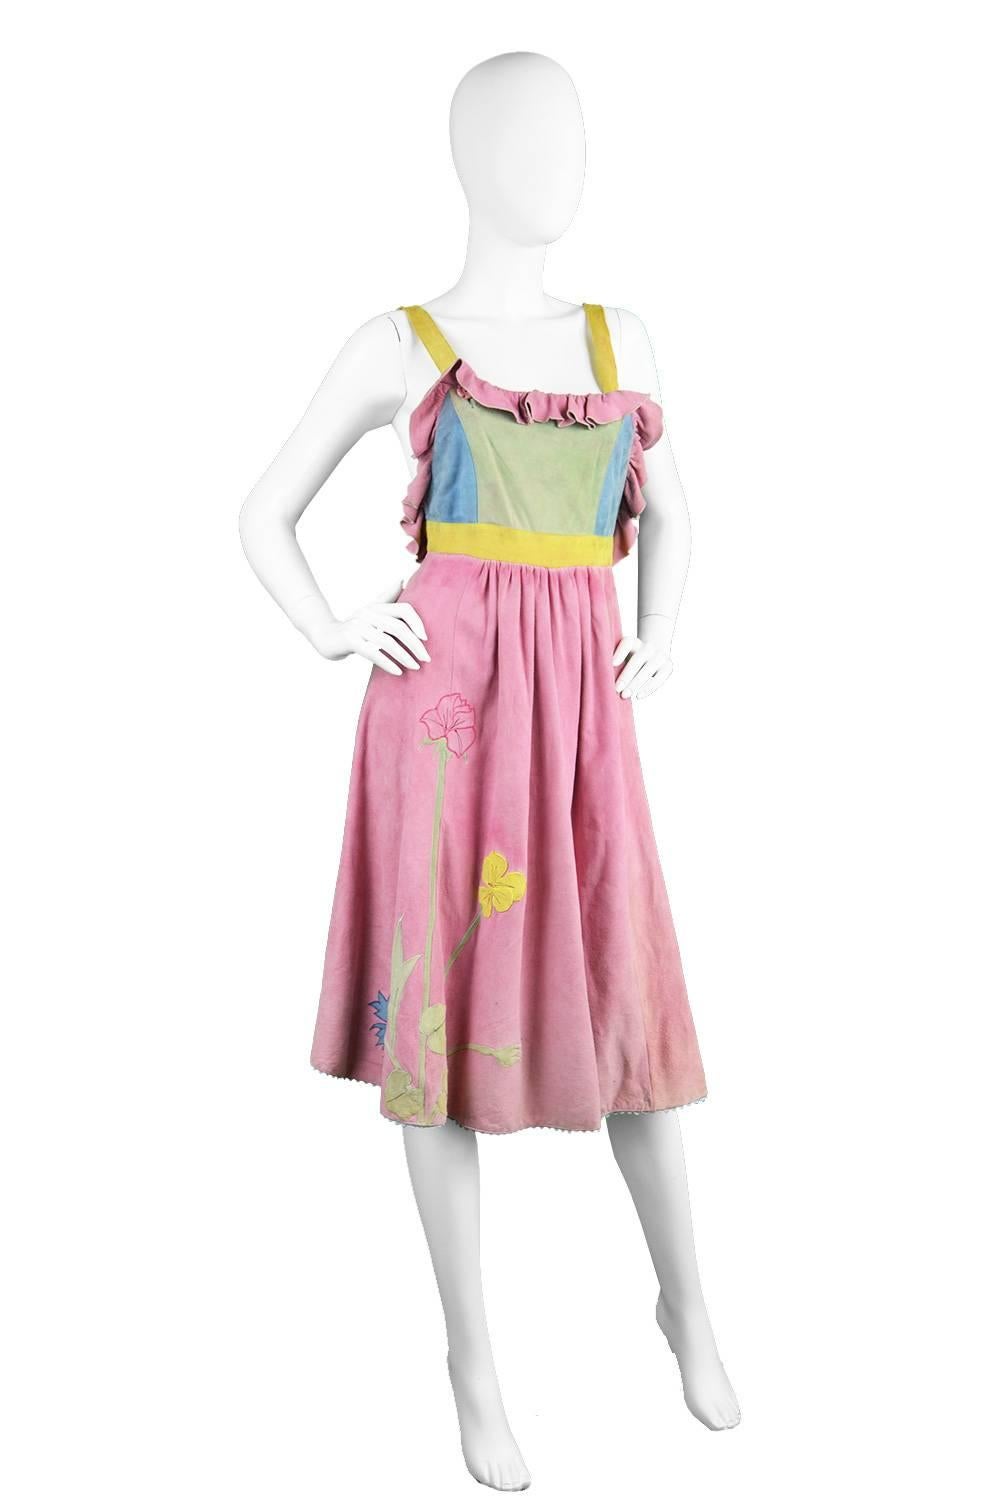 A fun and quirky vintage colorblock suede dress from the 70s by British boutique label, Pat Mariner for Edith Grove. 

Estimated Size: UK 10/ US 6/ EU 38
Bust - Open due to pinafore style
Waist - 28” / 71cm 
Hips - Free
Skirt Length (Waist to